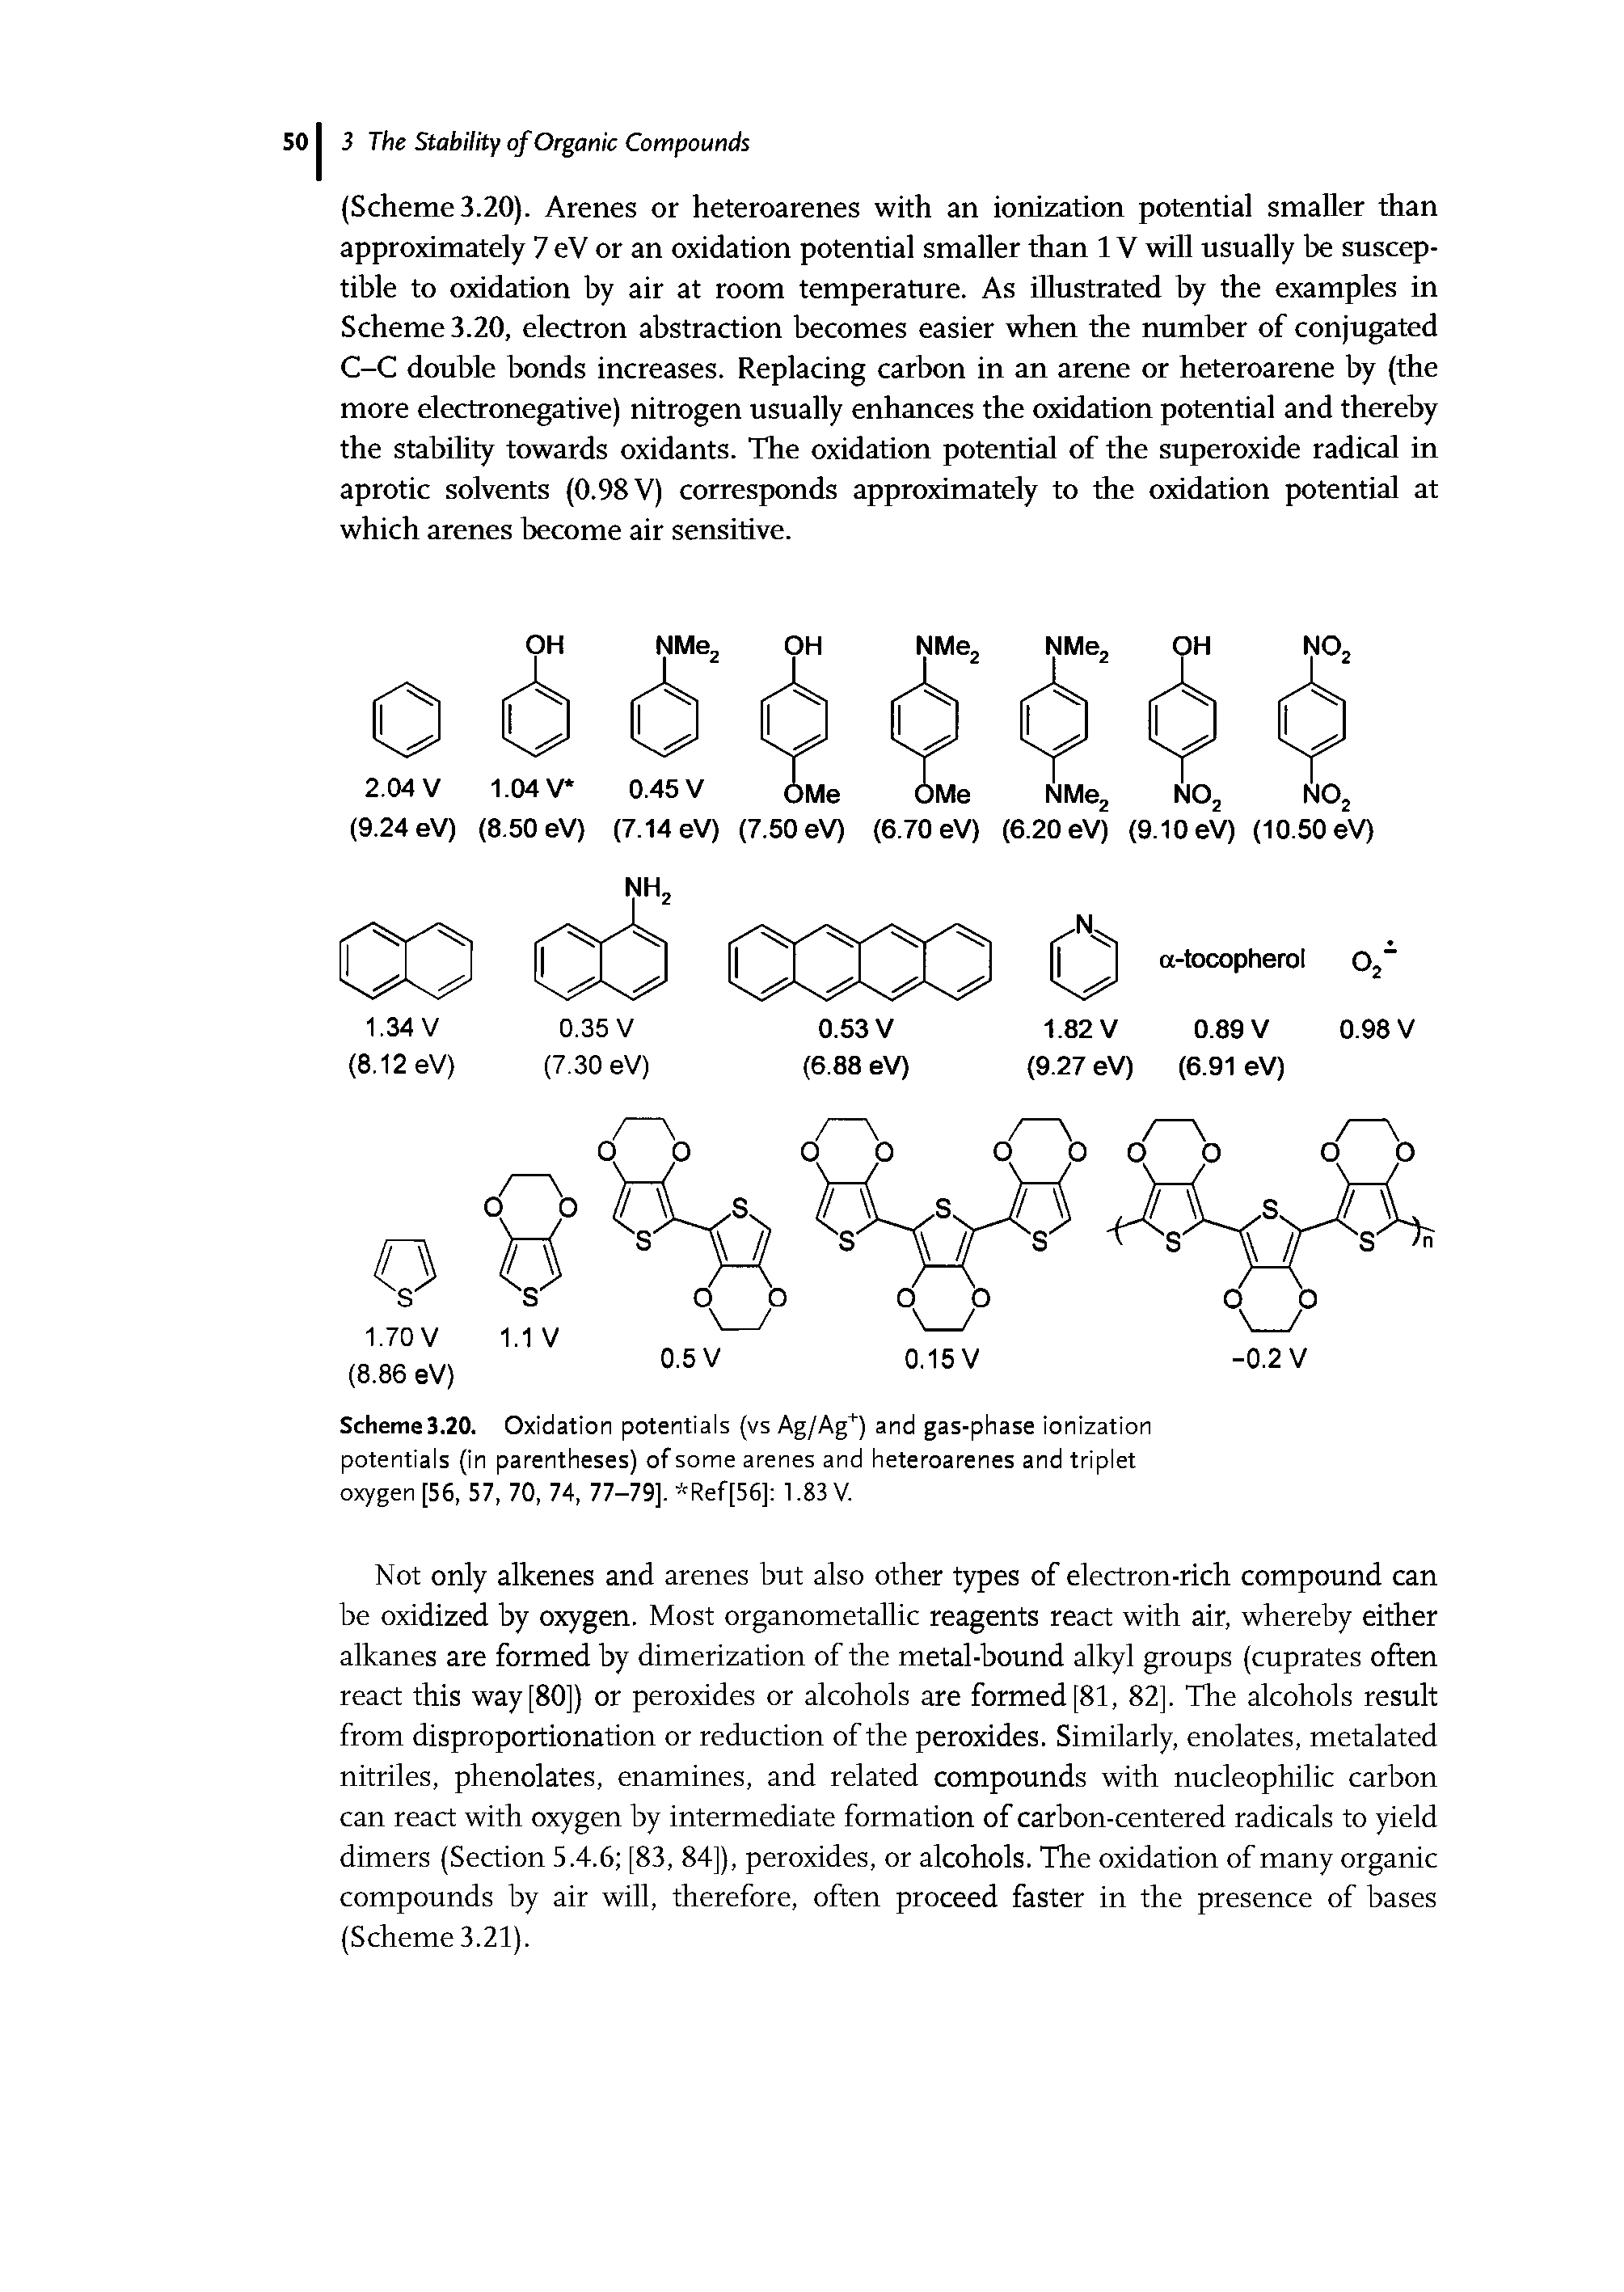 Scheme3.20. Oxidation potentials (vs Ag/Ag+) and gas-phase ionization potentials (in parentheses) of some arenes and heteroarenes and triplet oxygen [56, 57, 70, 74, 77-79], Ref[56] 1.83 V.